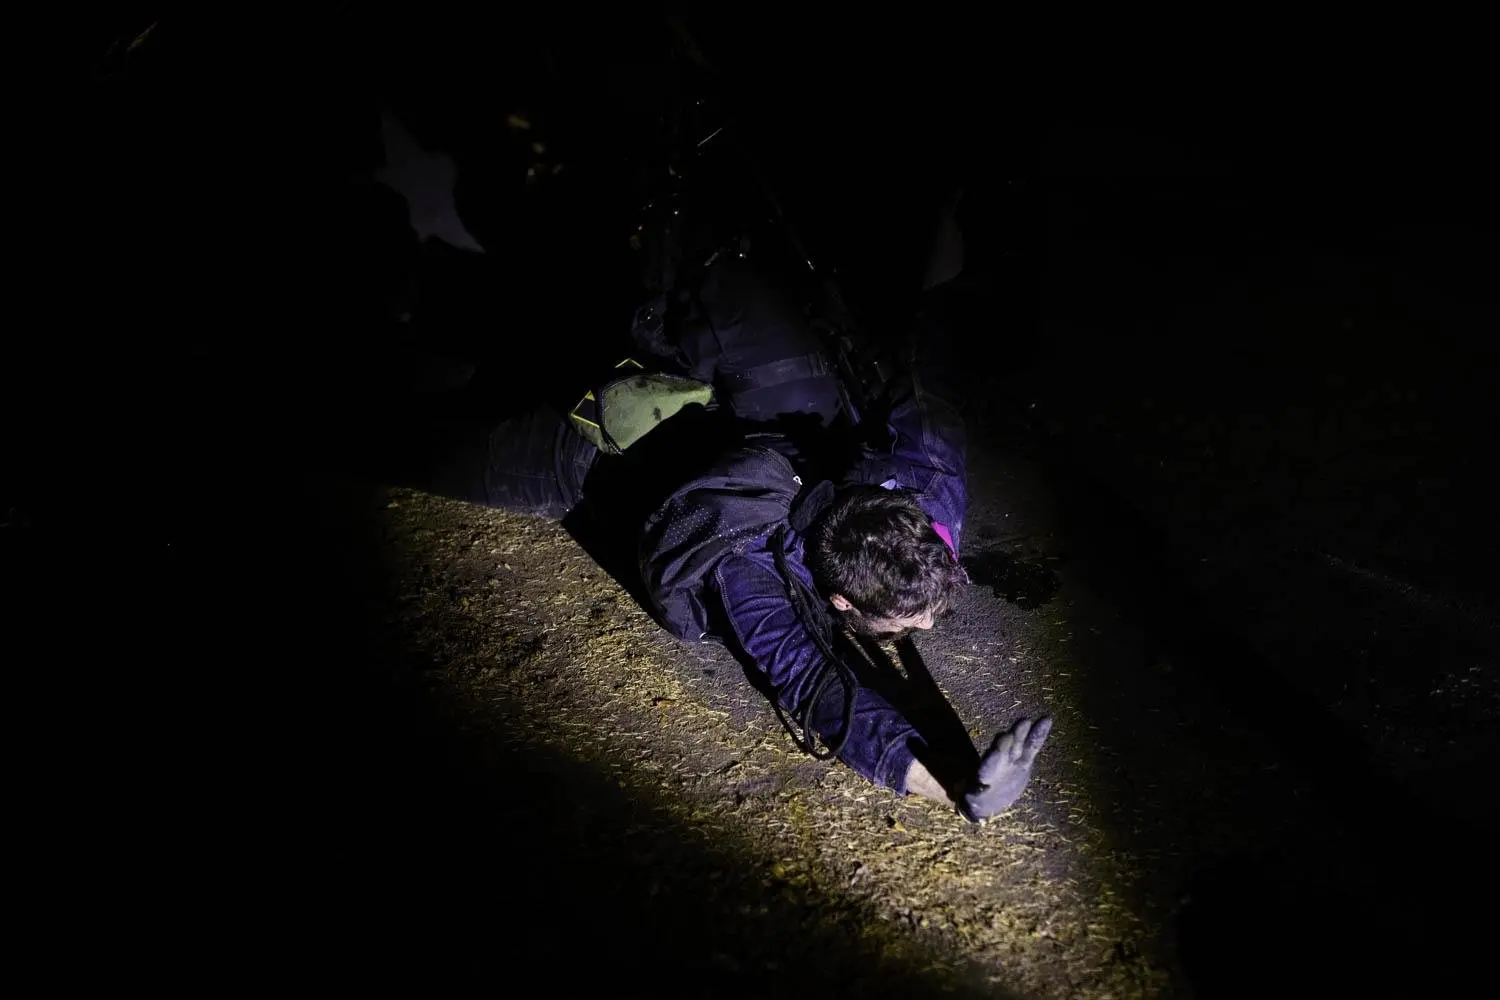 A protester reaches out while being arrested on a dark suburban street in Portland, Oregon. 